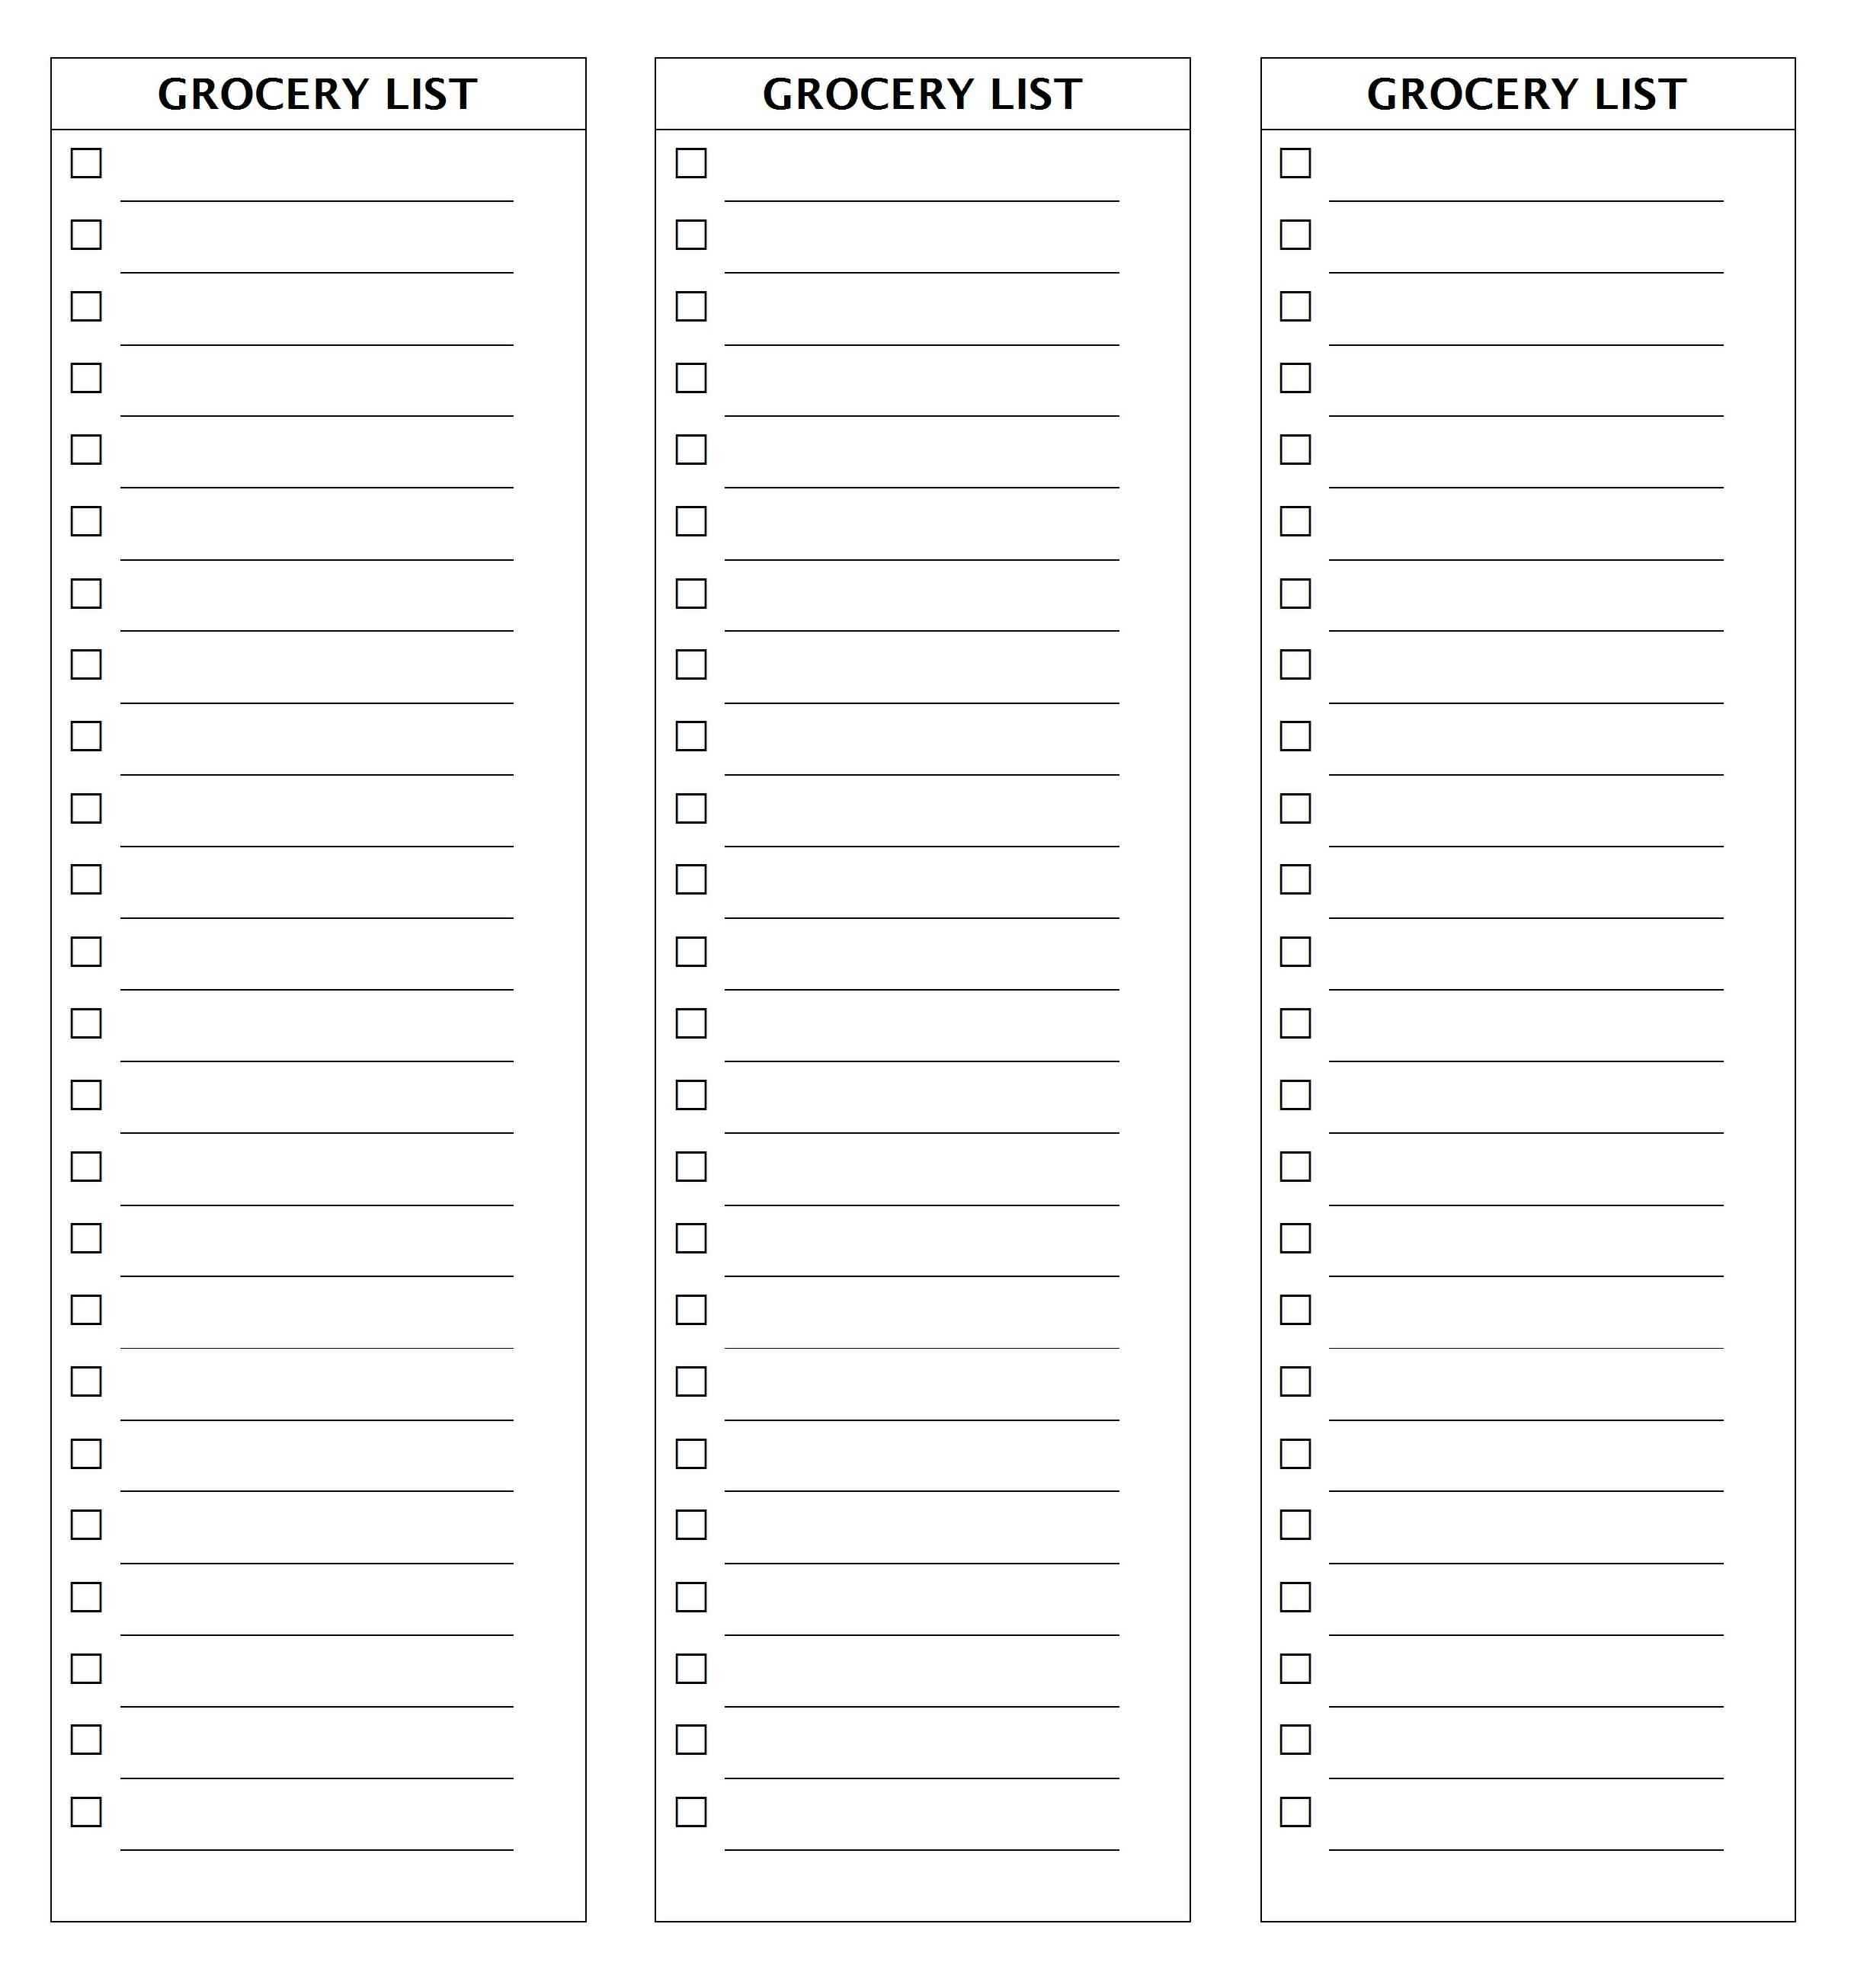 28 Free Printable Grocery List Templates | Kittybabylove Within Blank Grocery Shopping List Template